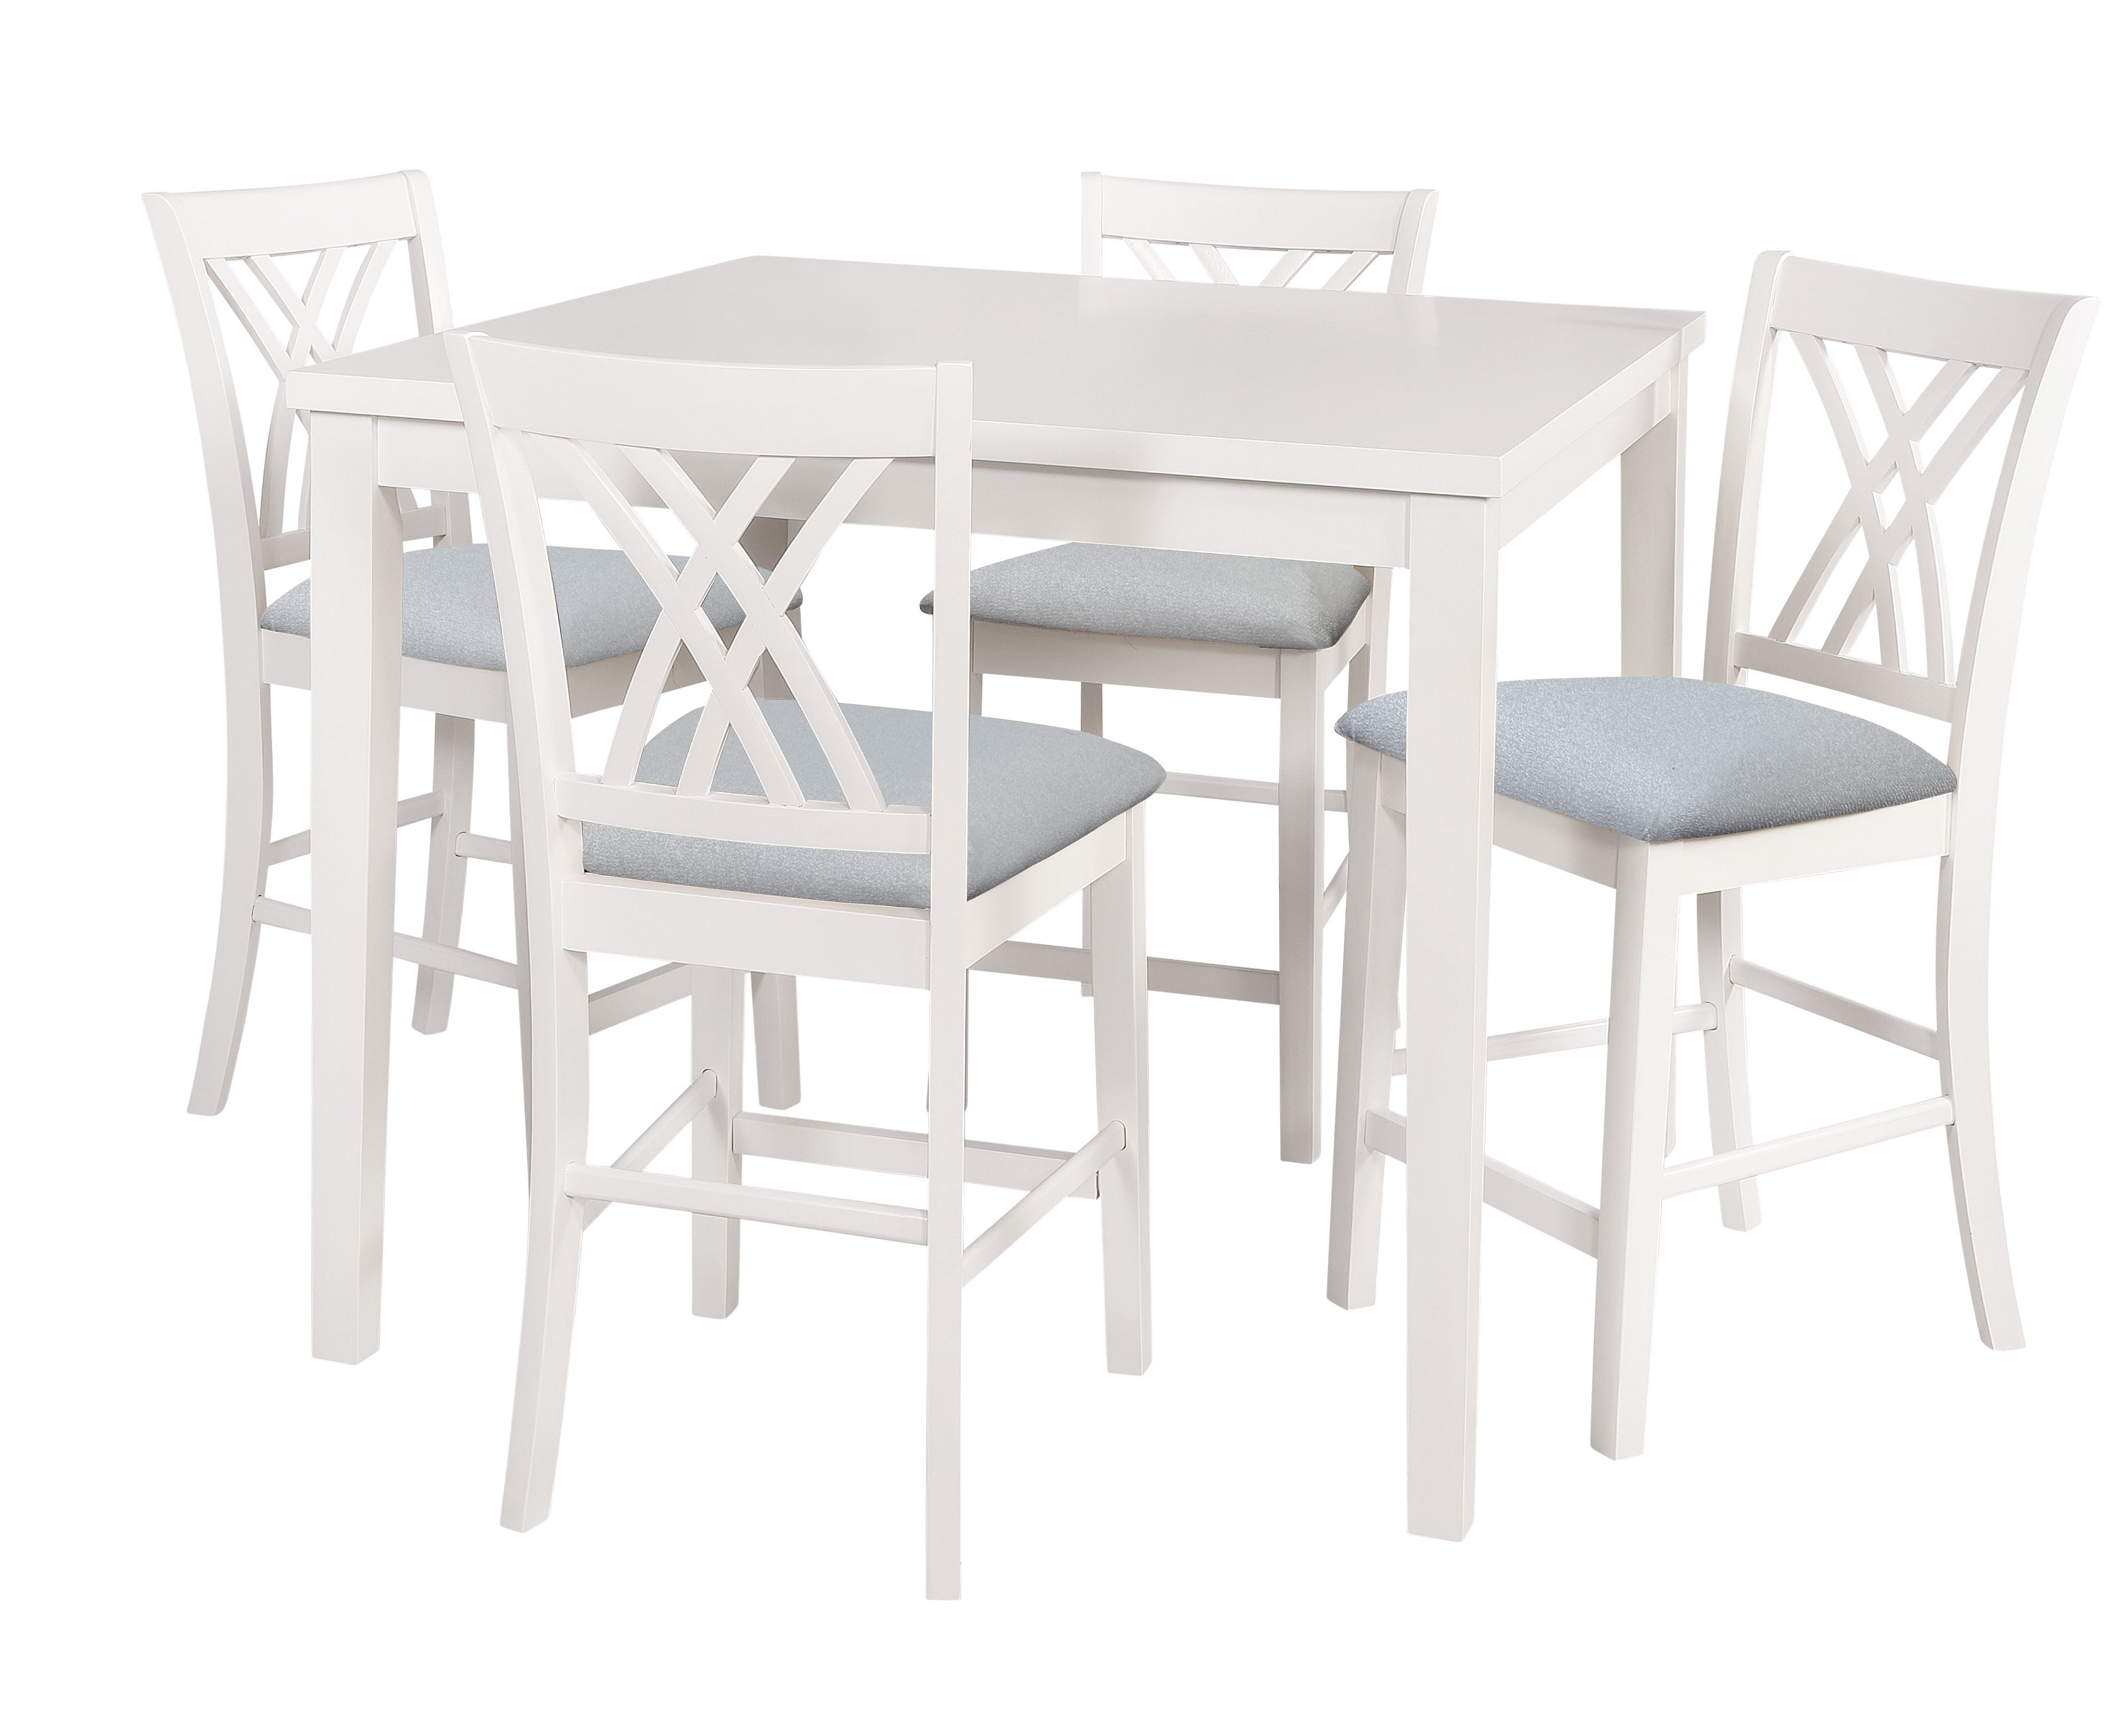 5 Piece Breakfast Nook Dining Sets Regarding Most Current Highland Dunes Gisella 5 Piece Breakfast Nook Dining Set & Reviews (View 3 of 25)